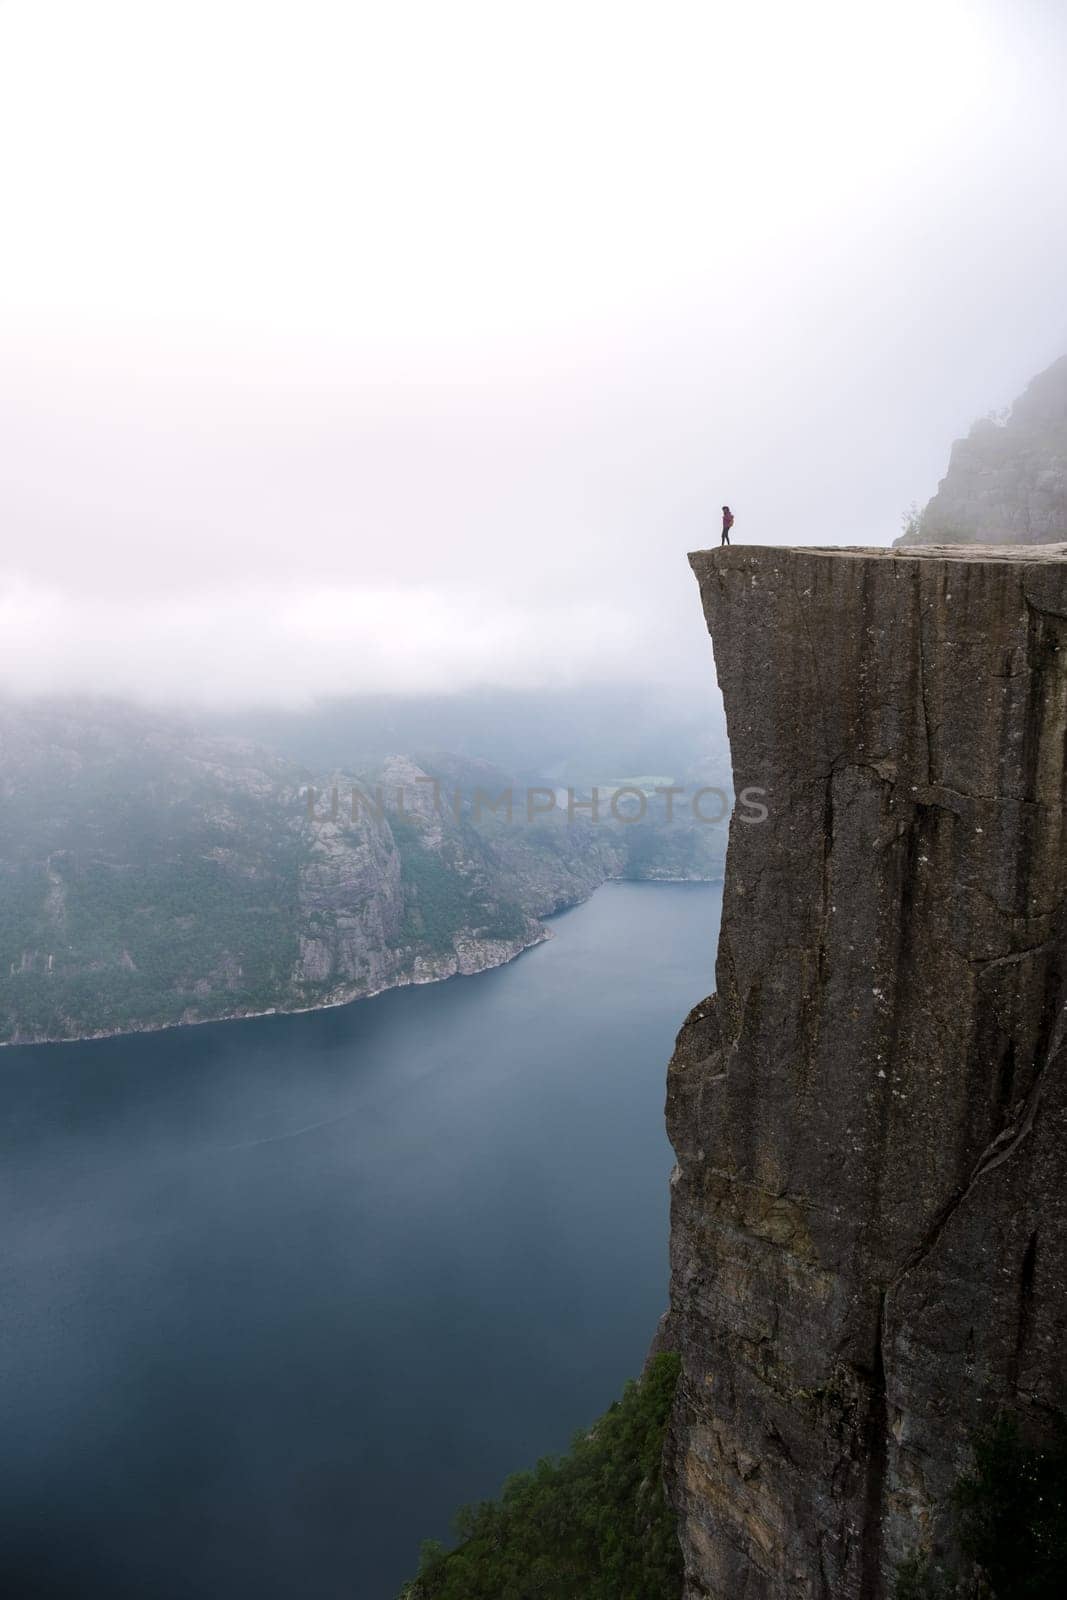 A lone individual stands on the edge of Preikestolen, a cliff in Norway overlooking a fjord. by fokkebok